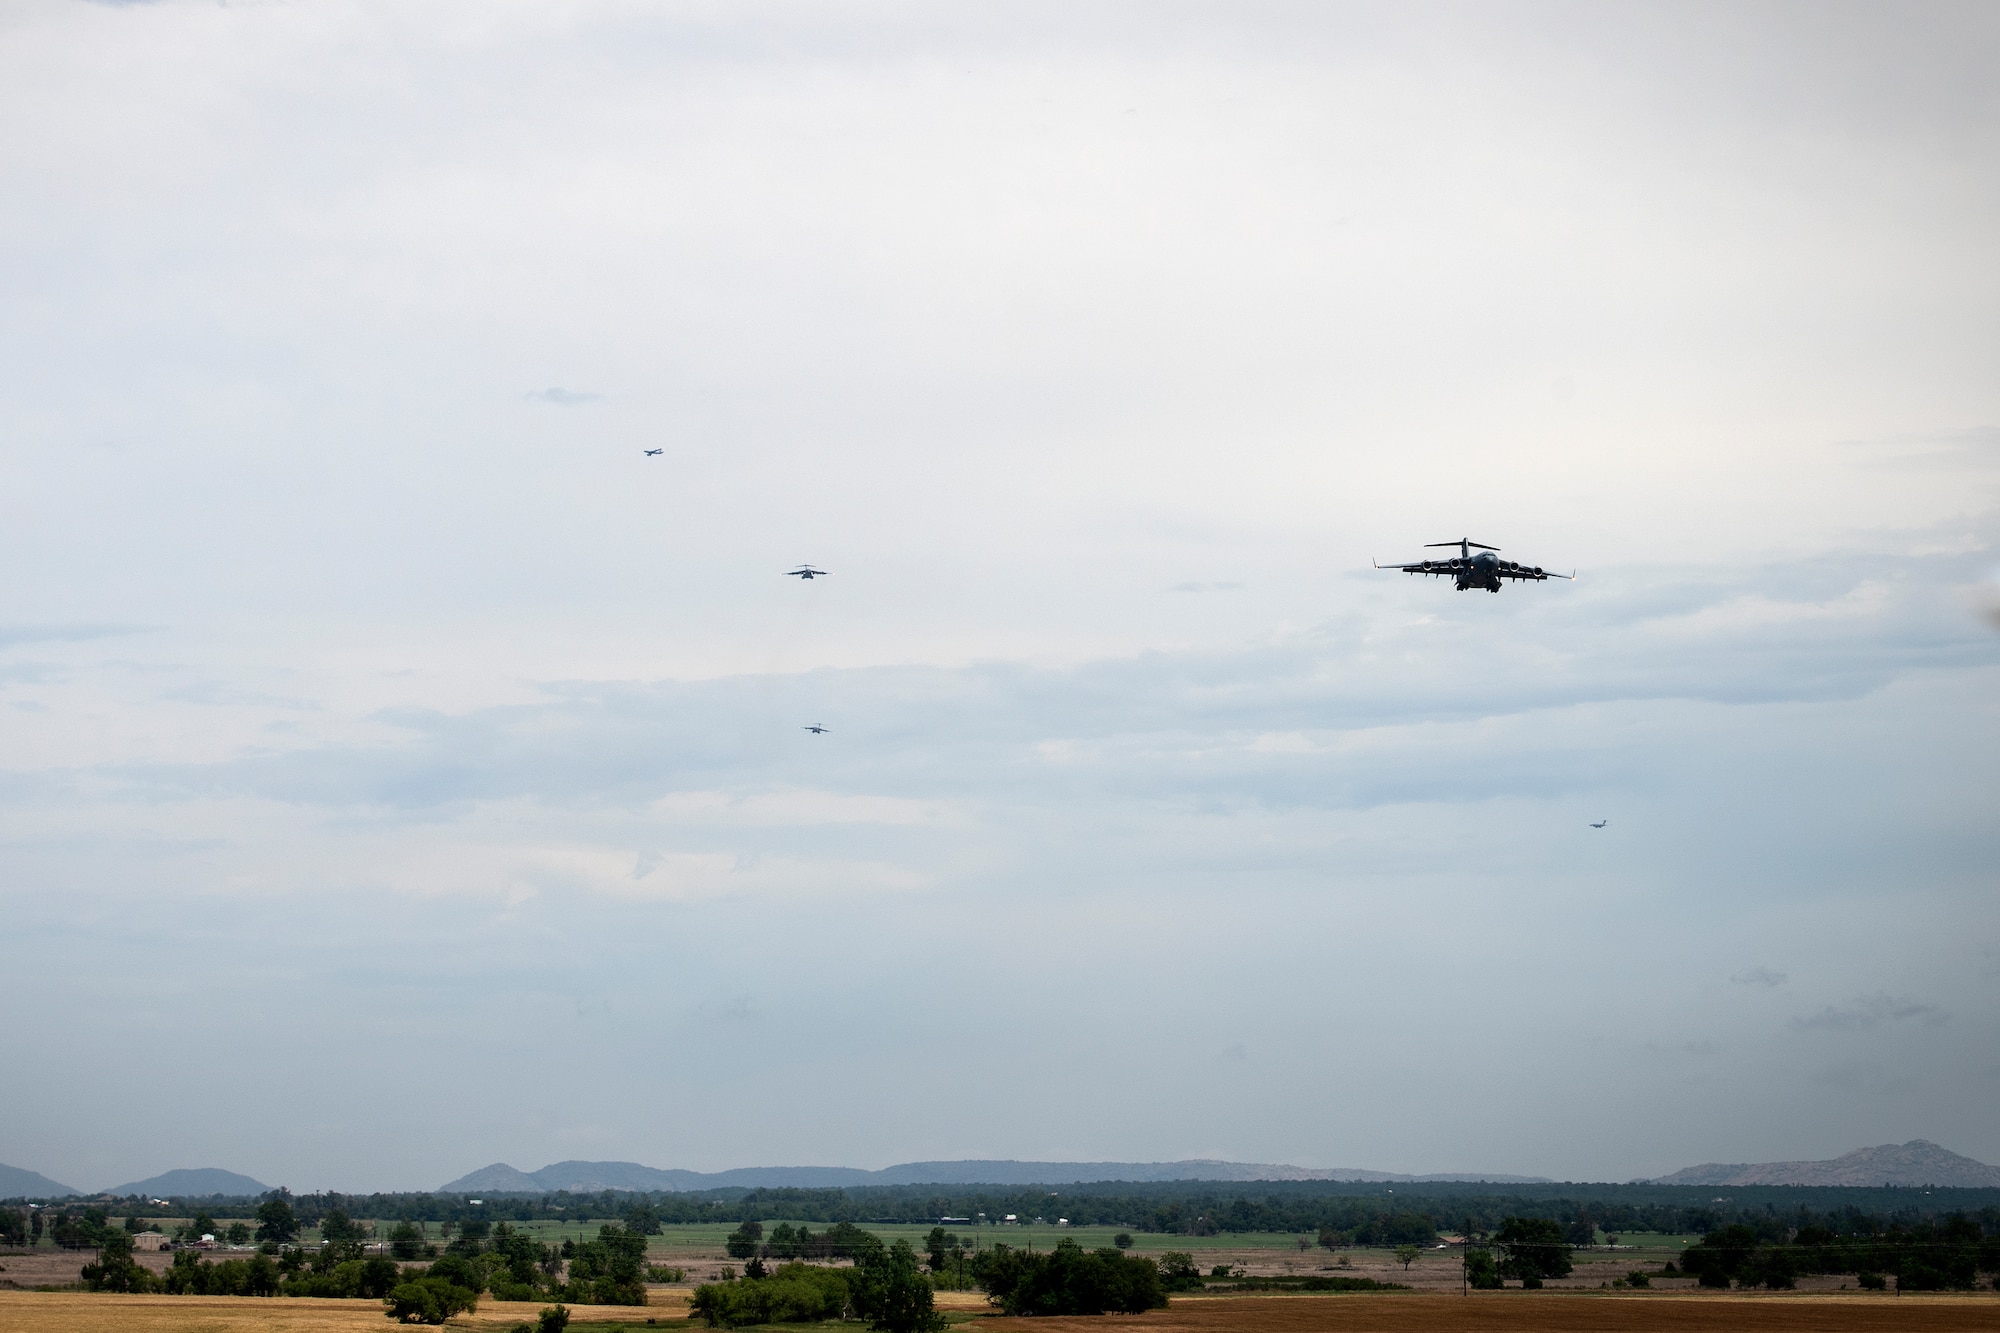 A formation of U.S. Air Force C-17 Globemaster IIIs approach the runway at Altus Air Force Base, Oklahoma, during a large formation exercise, May 21, 2020.